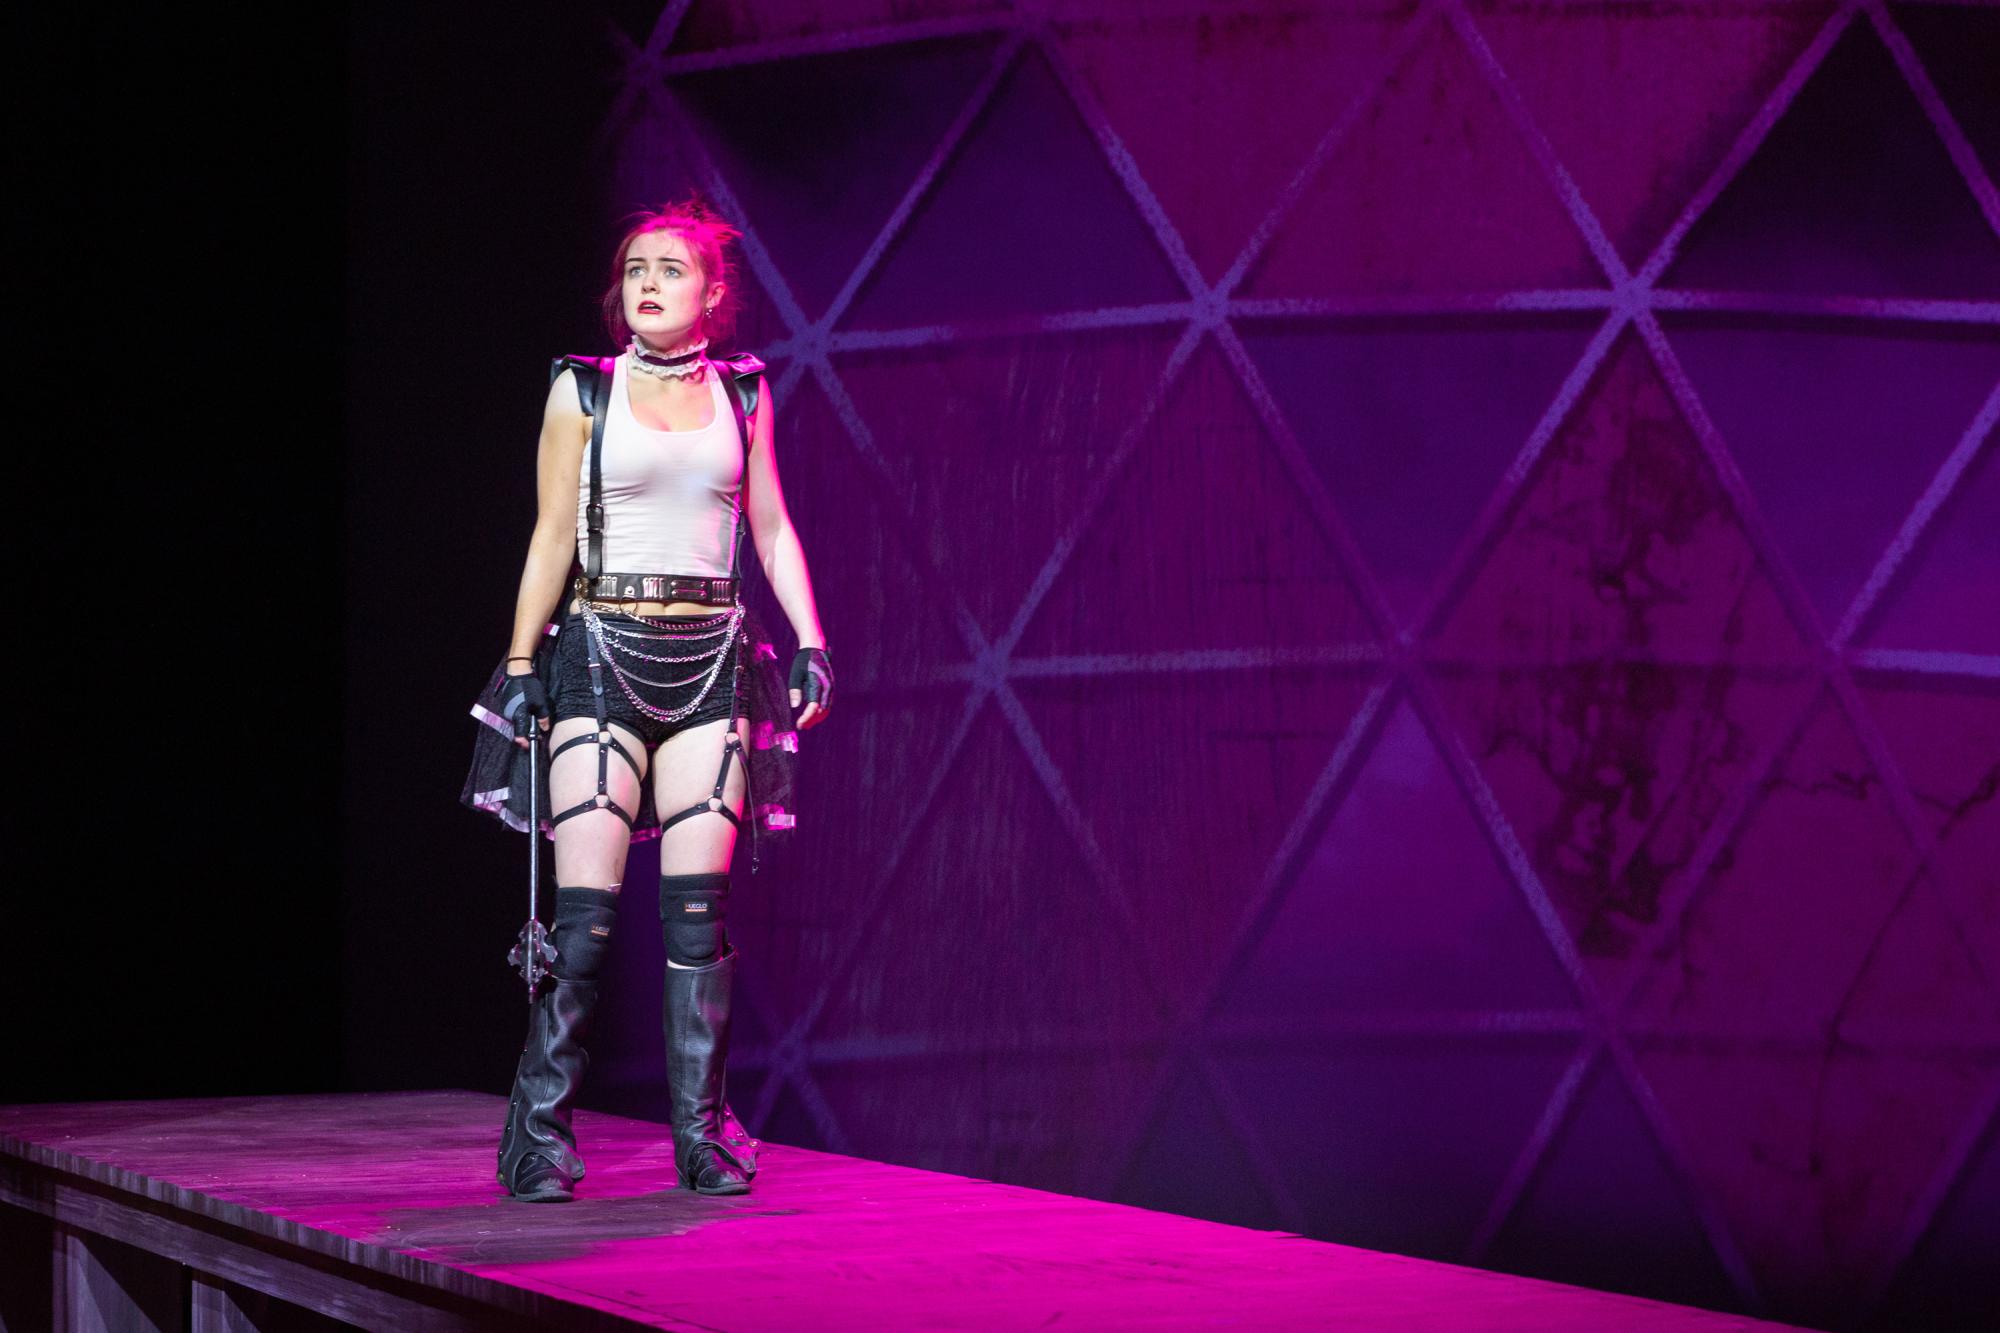 actor in a WWE maid costume looks concerned, with pink stage lighting